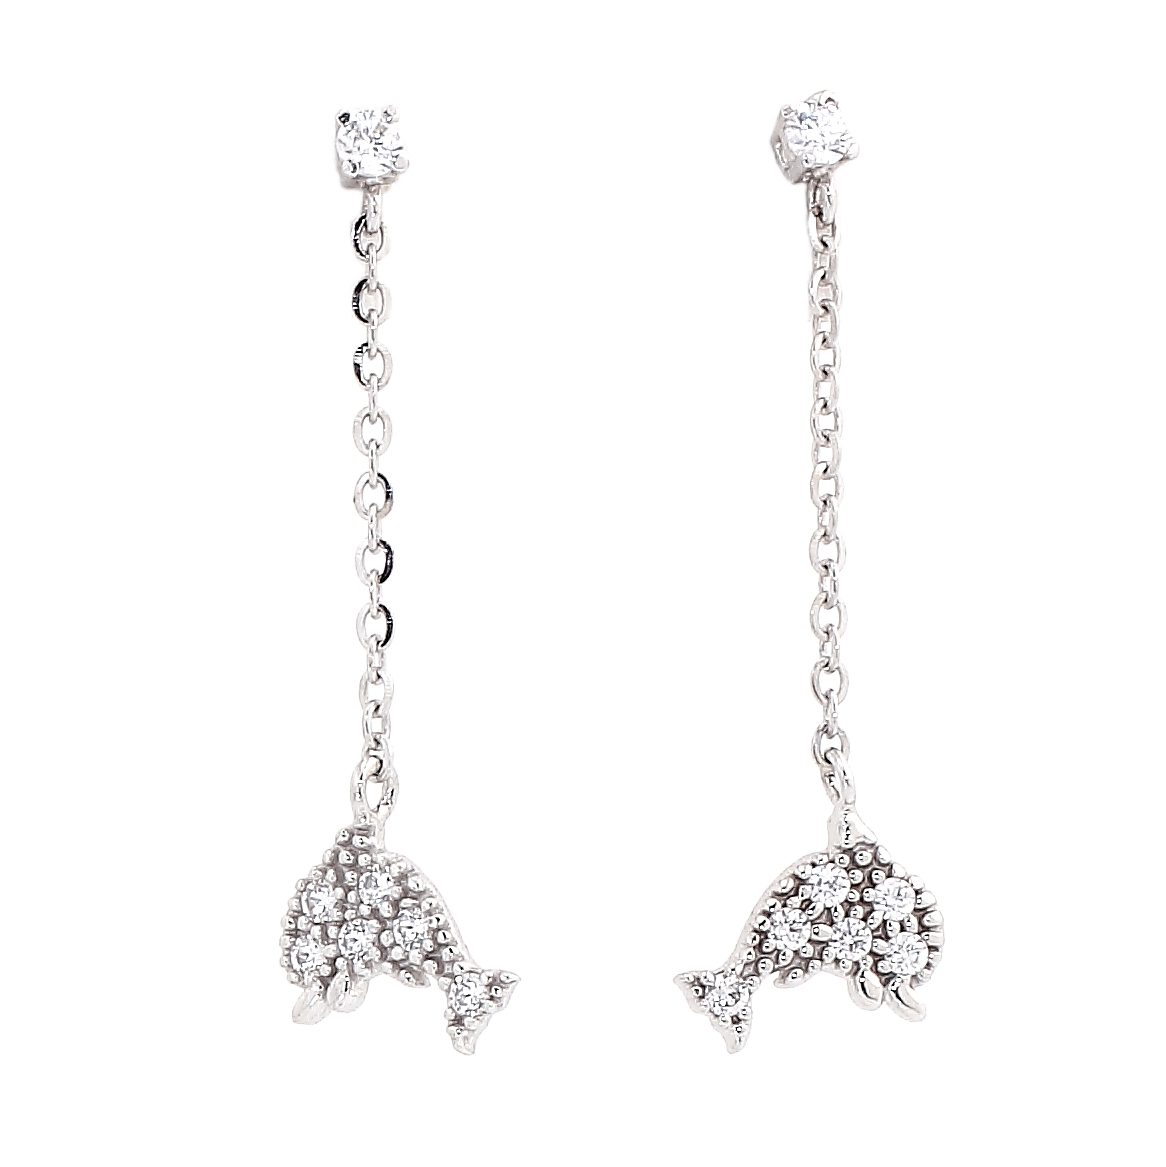 18 Kt White Gold Earrings with Cubic Zirconia